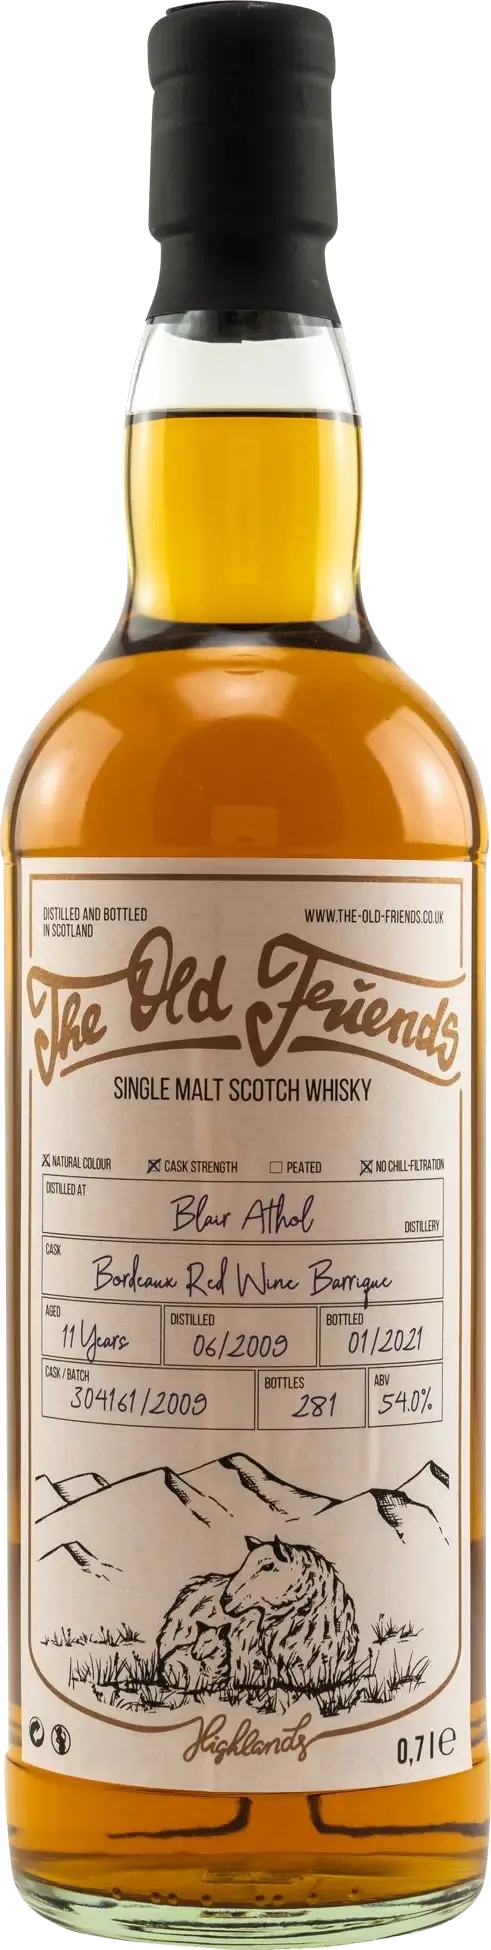 Blair Athol 11 Year Old - The Old Friends